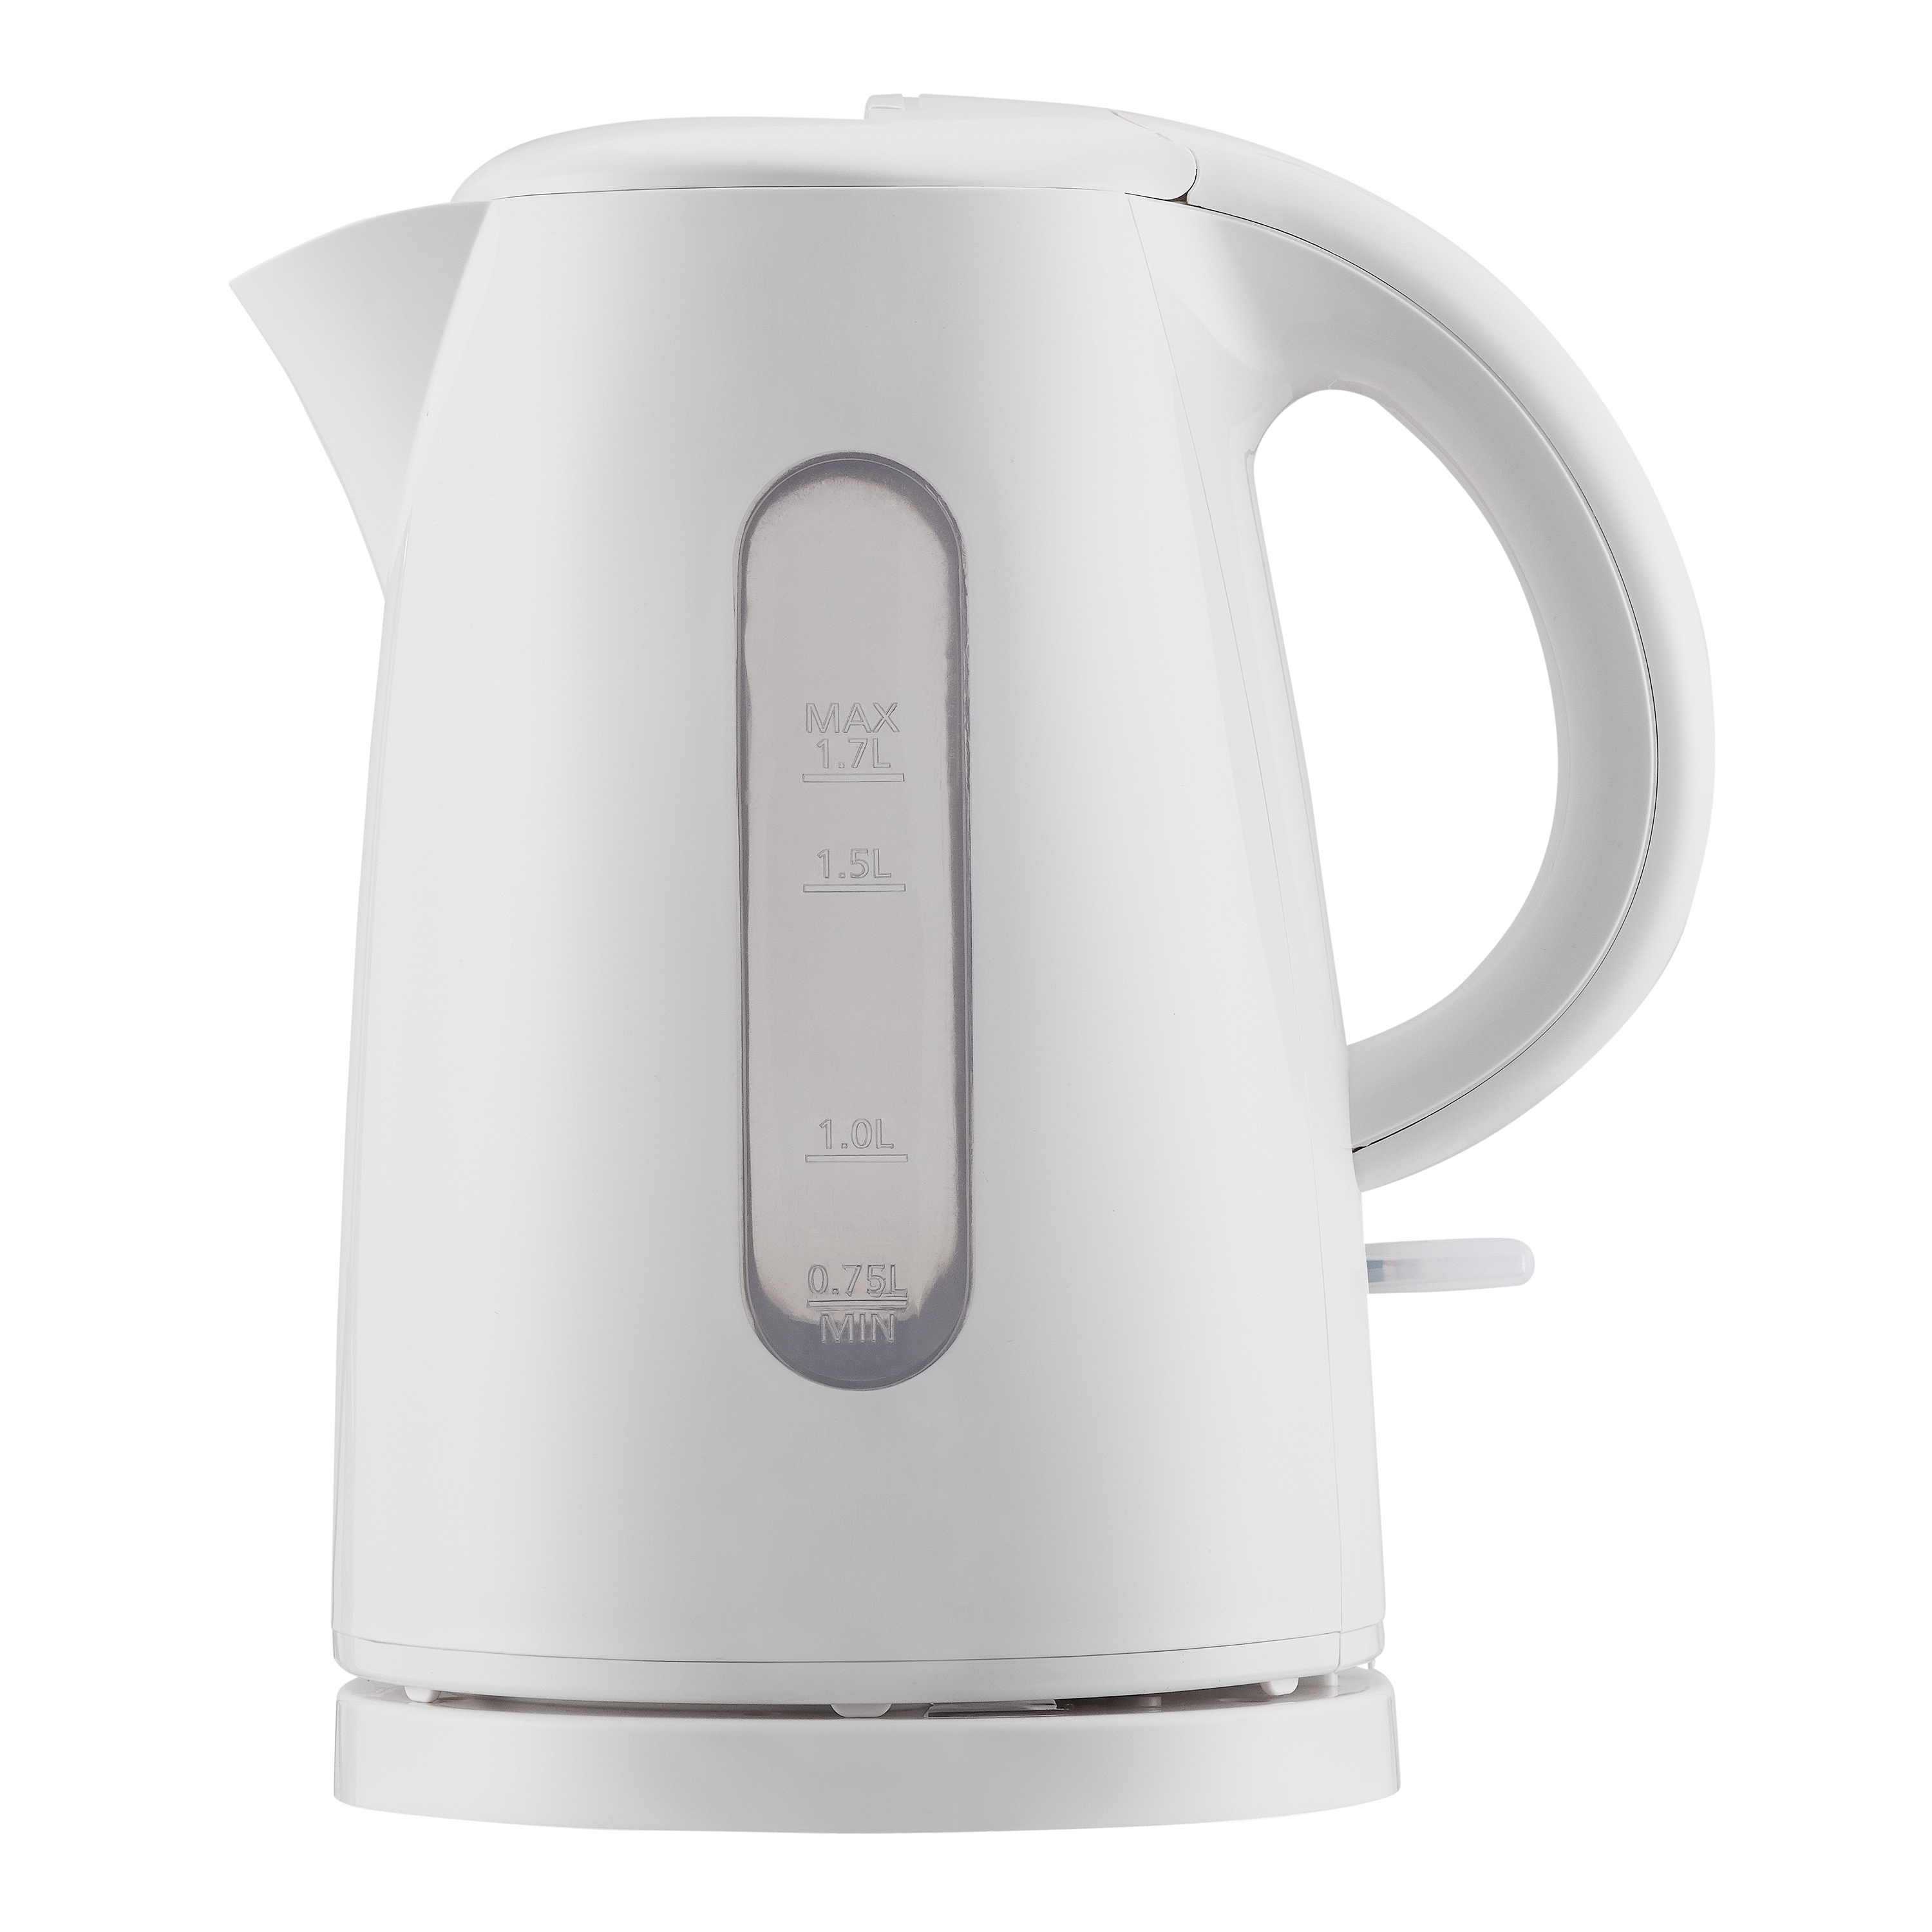 Mainstays 1.7 Liter Plastic Electric Kettle, White - image 1 of 6